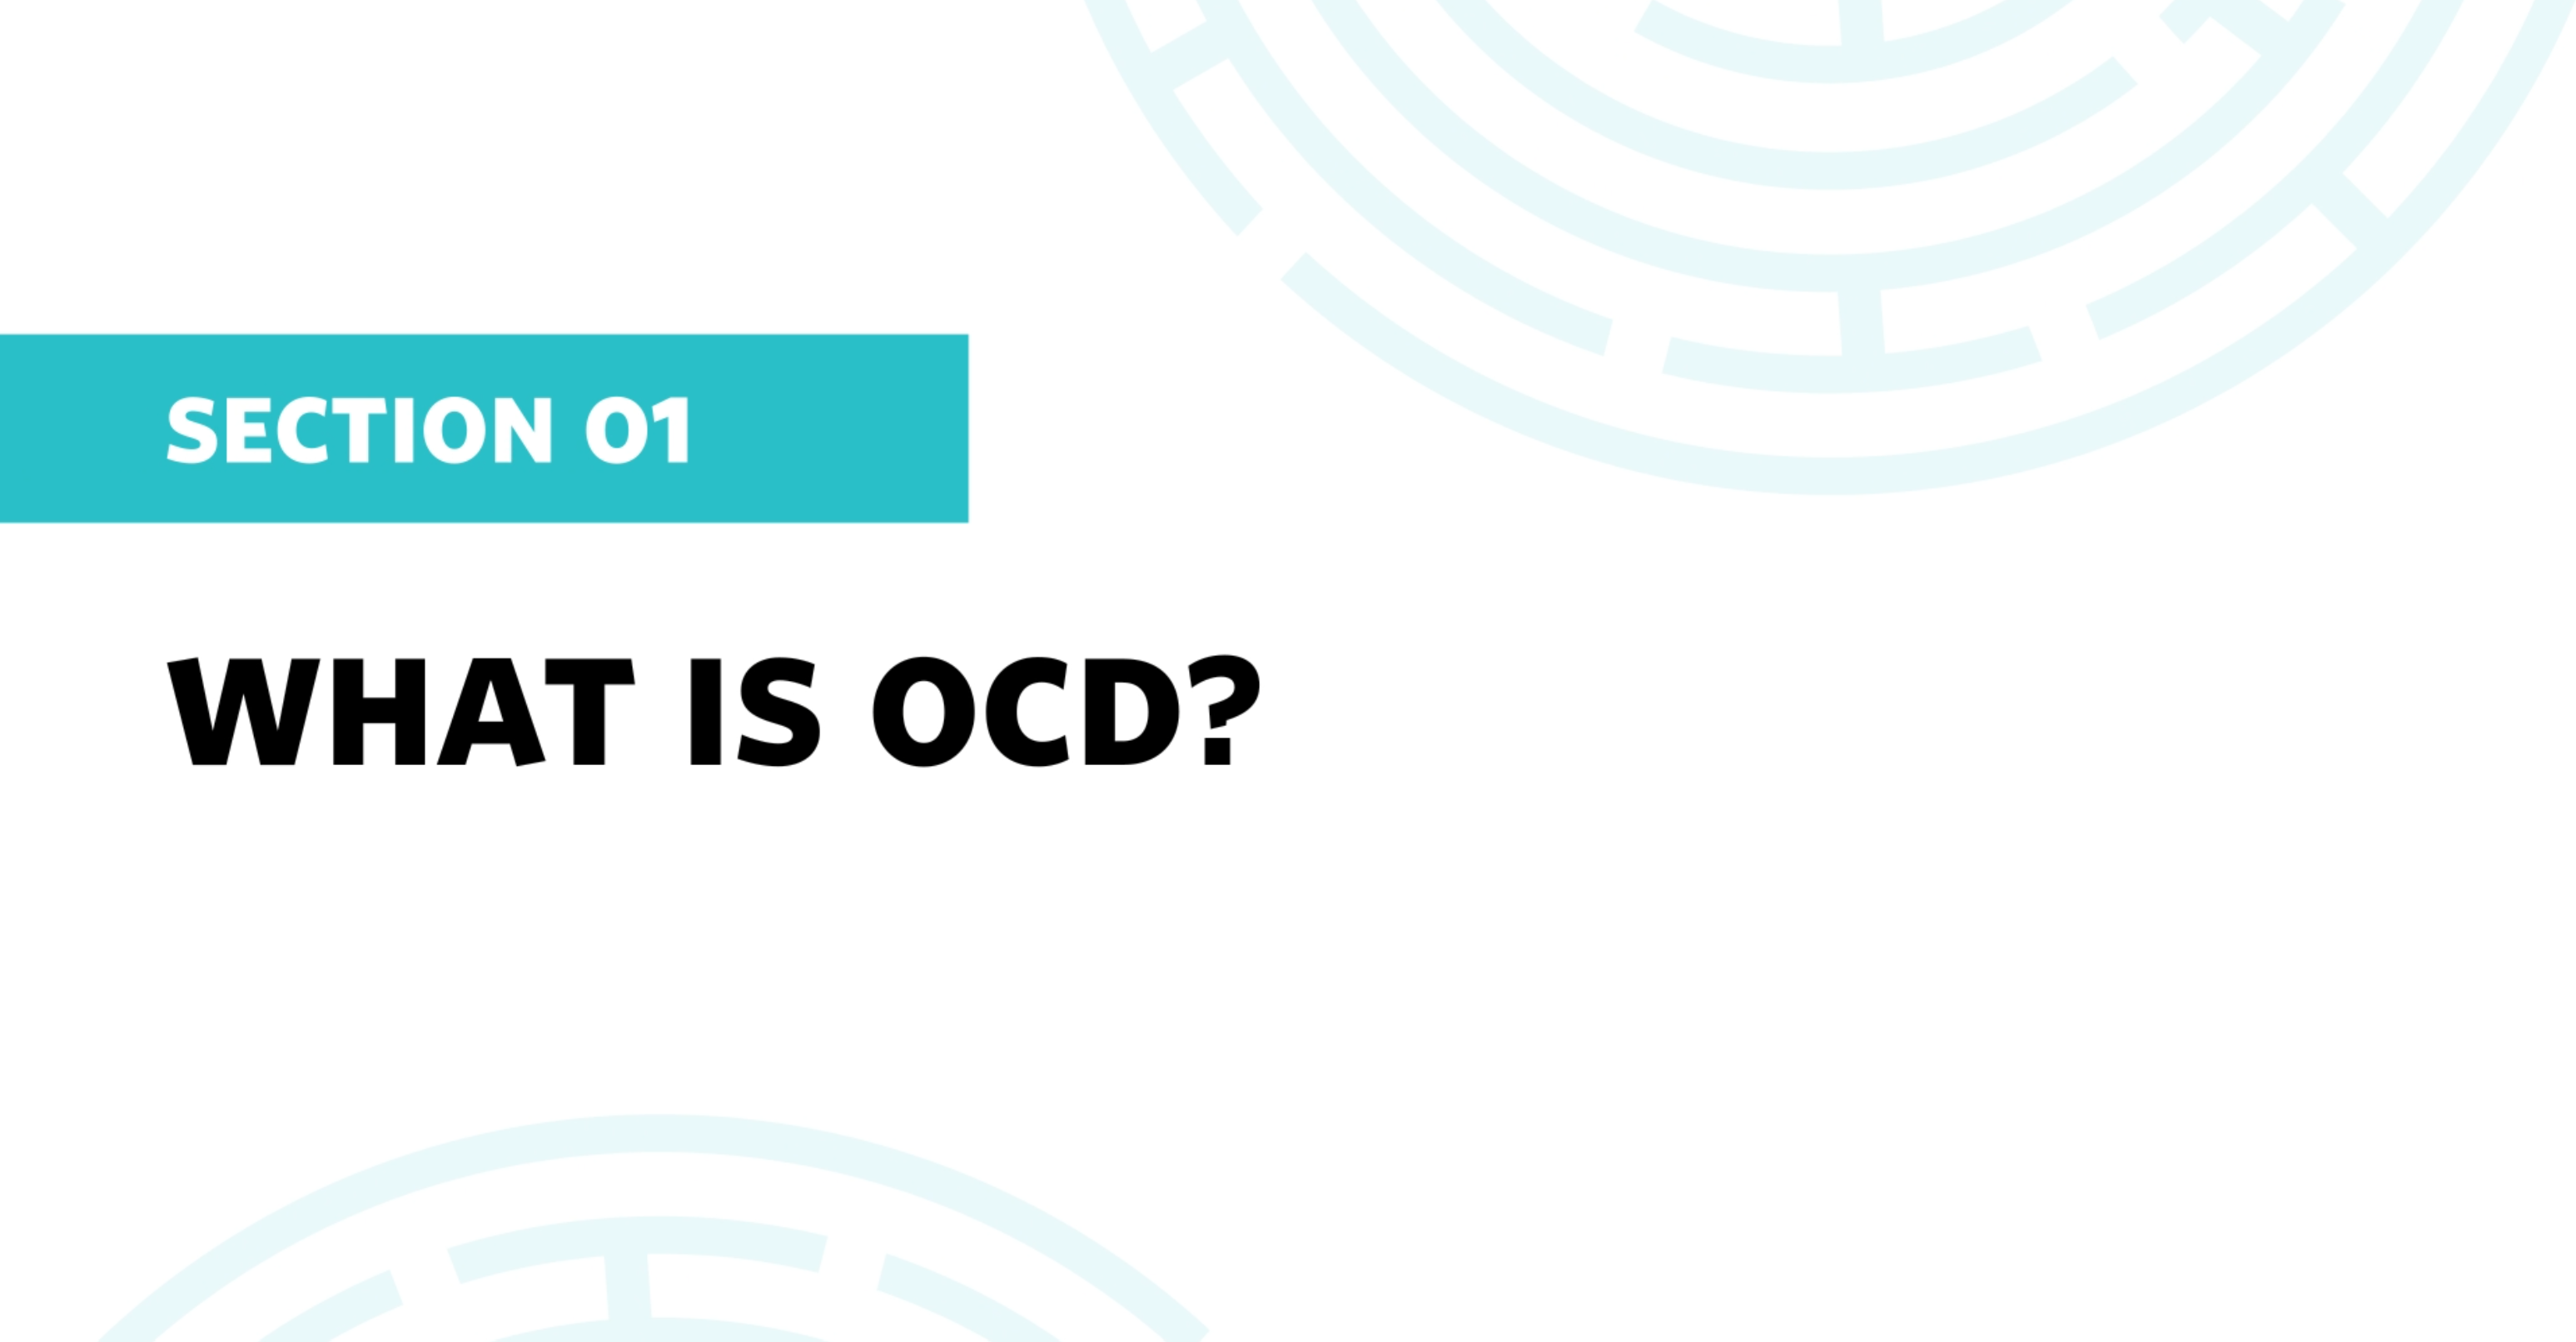 Part 1 - What is OCD?